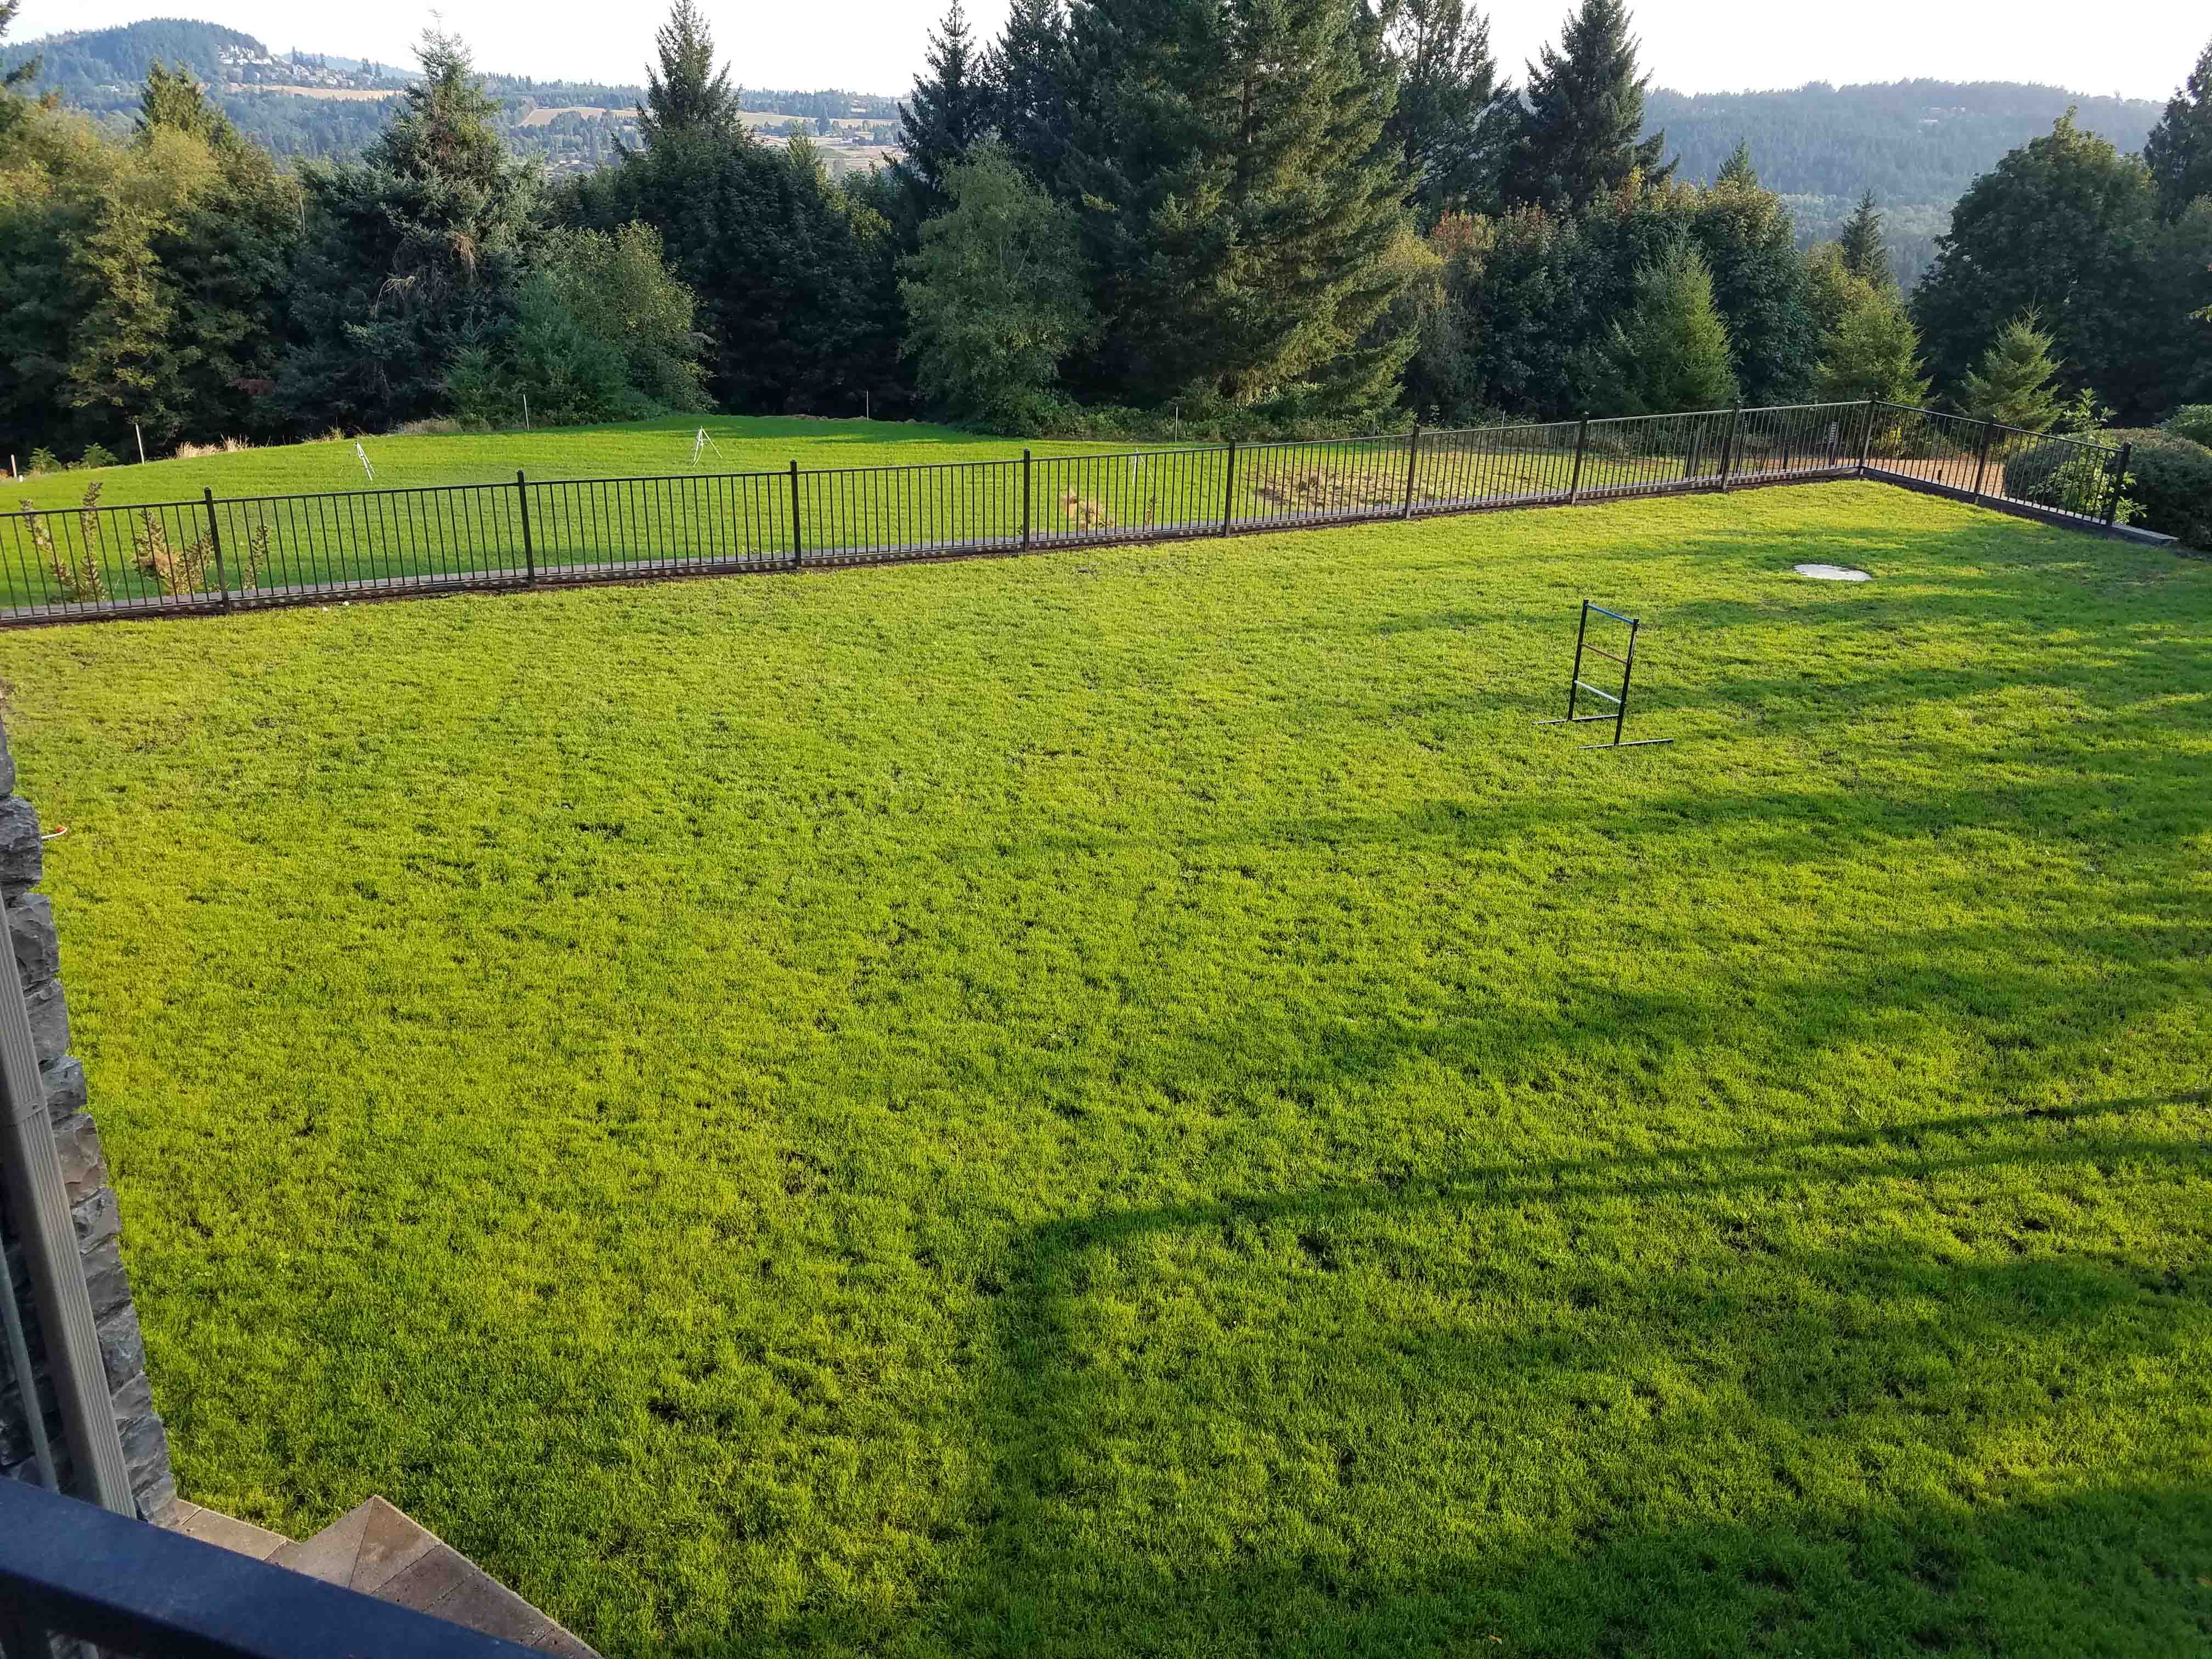 Freshly laid grass in a new leveled backyard with retaining wall and metal fence railings